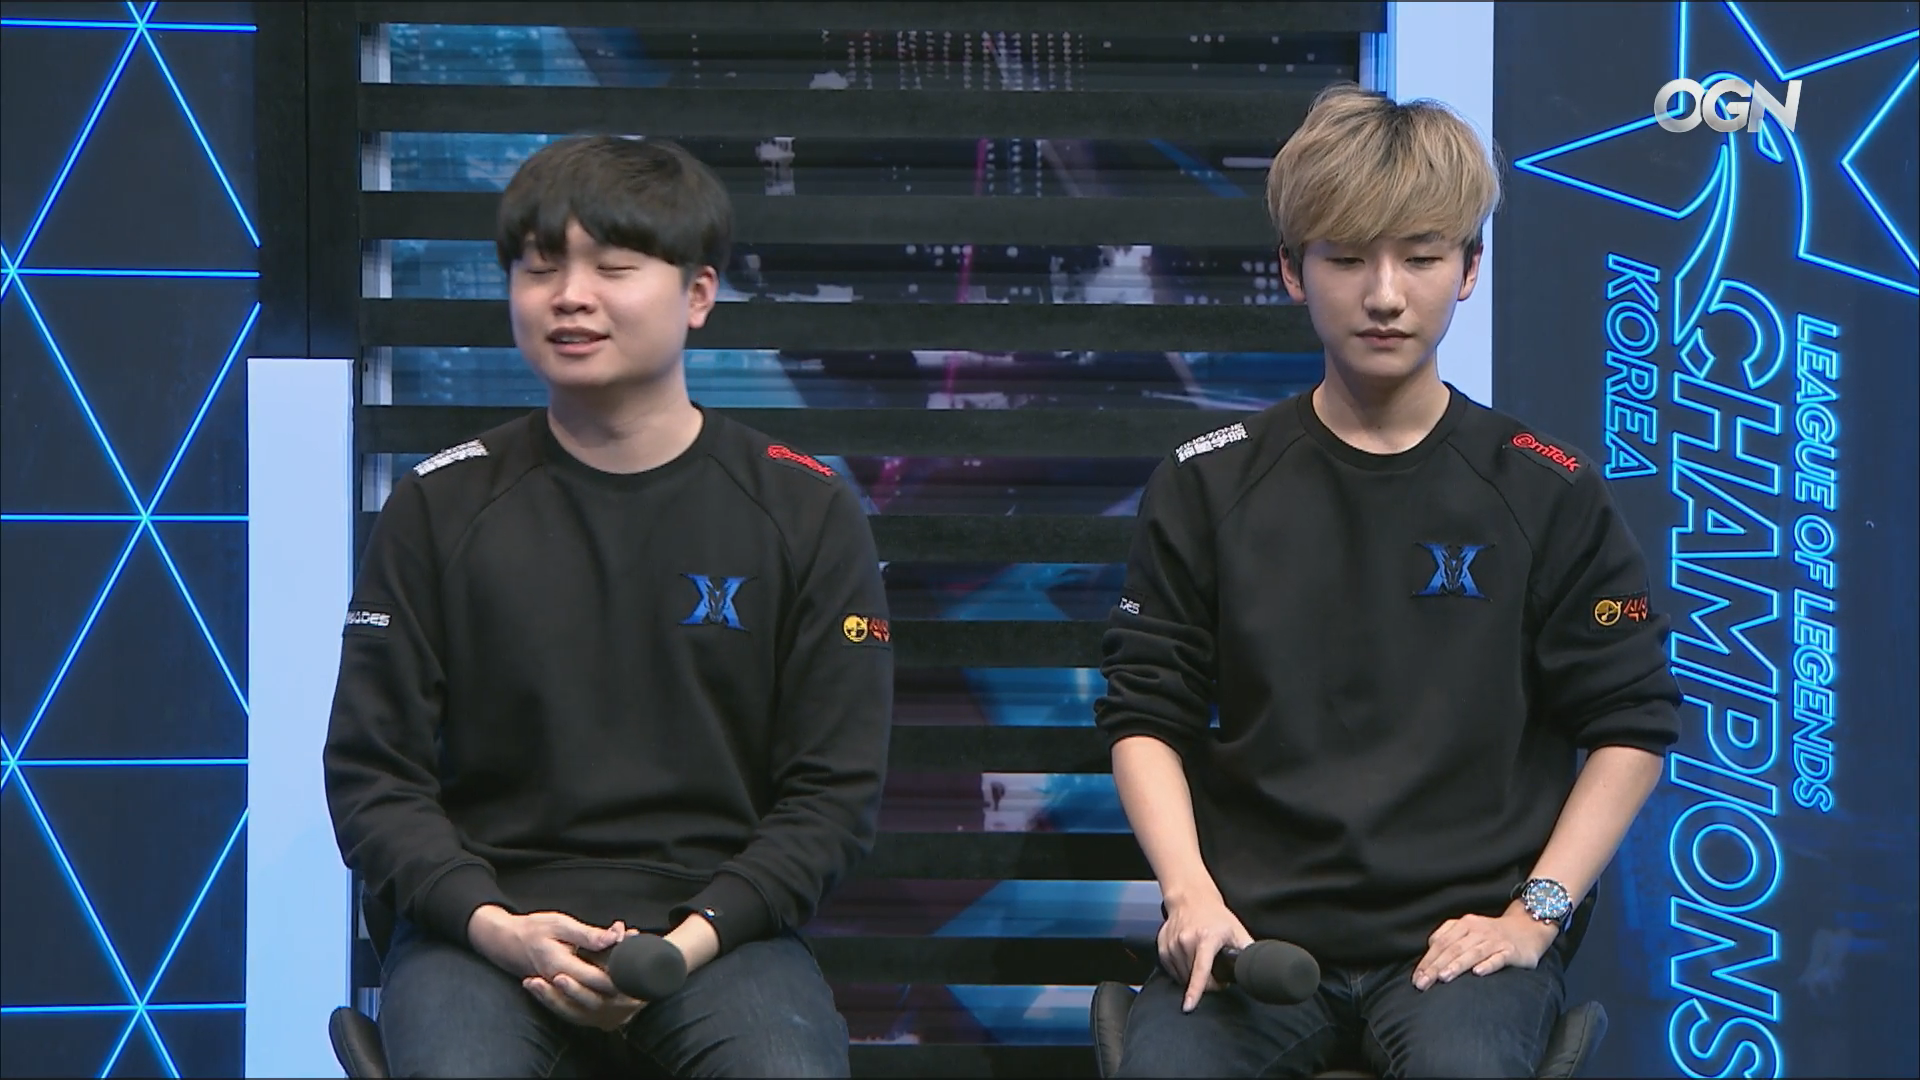 King Zone Dragonx Beat Kt Rolster To Go Top Of The Lck Dot Esports